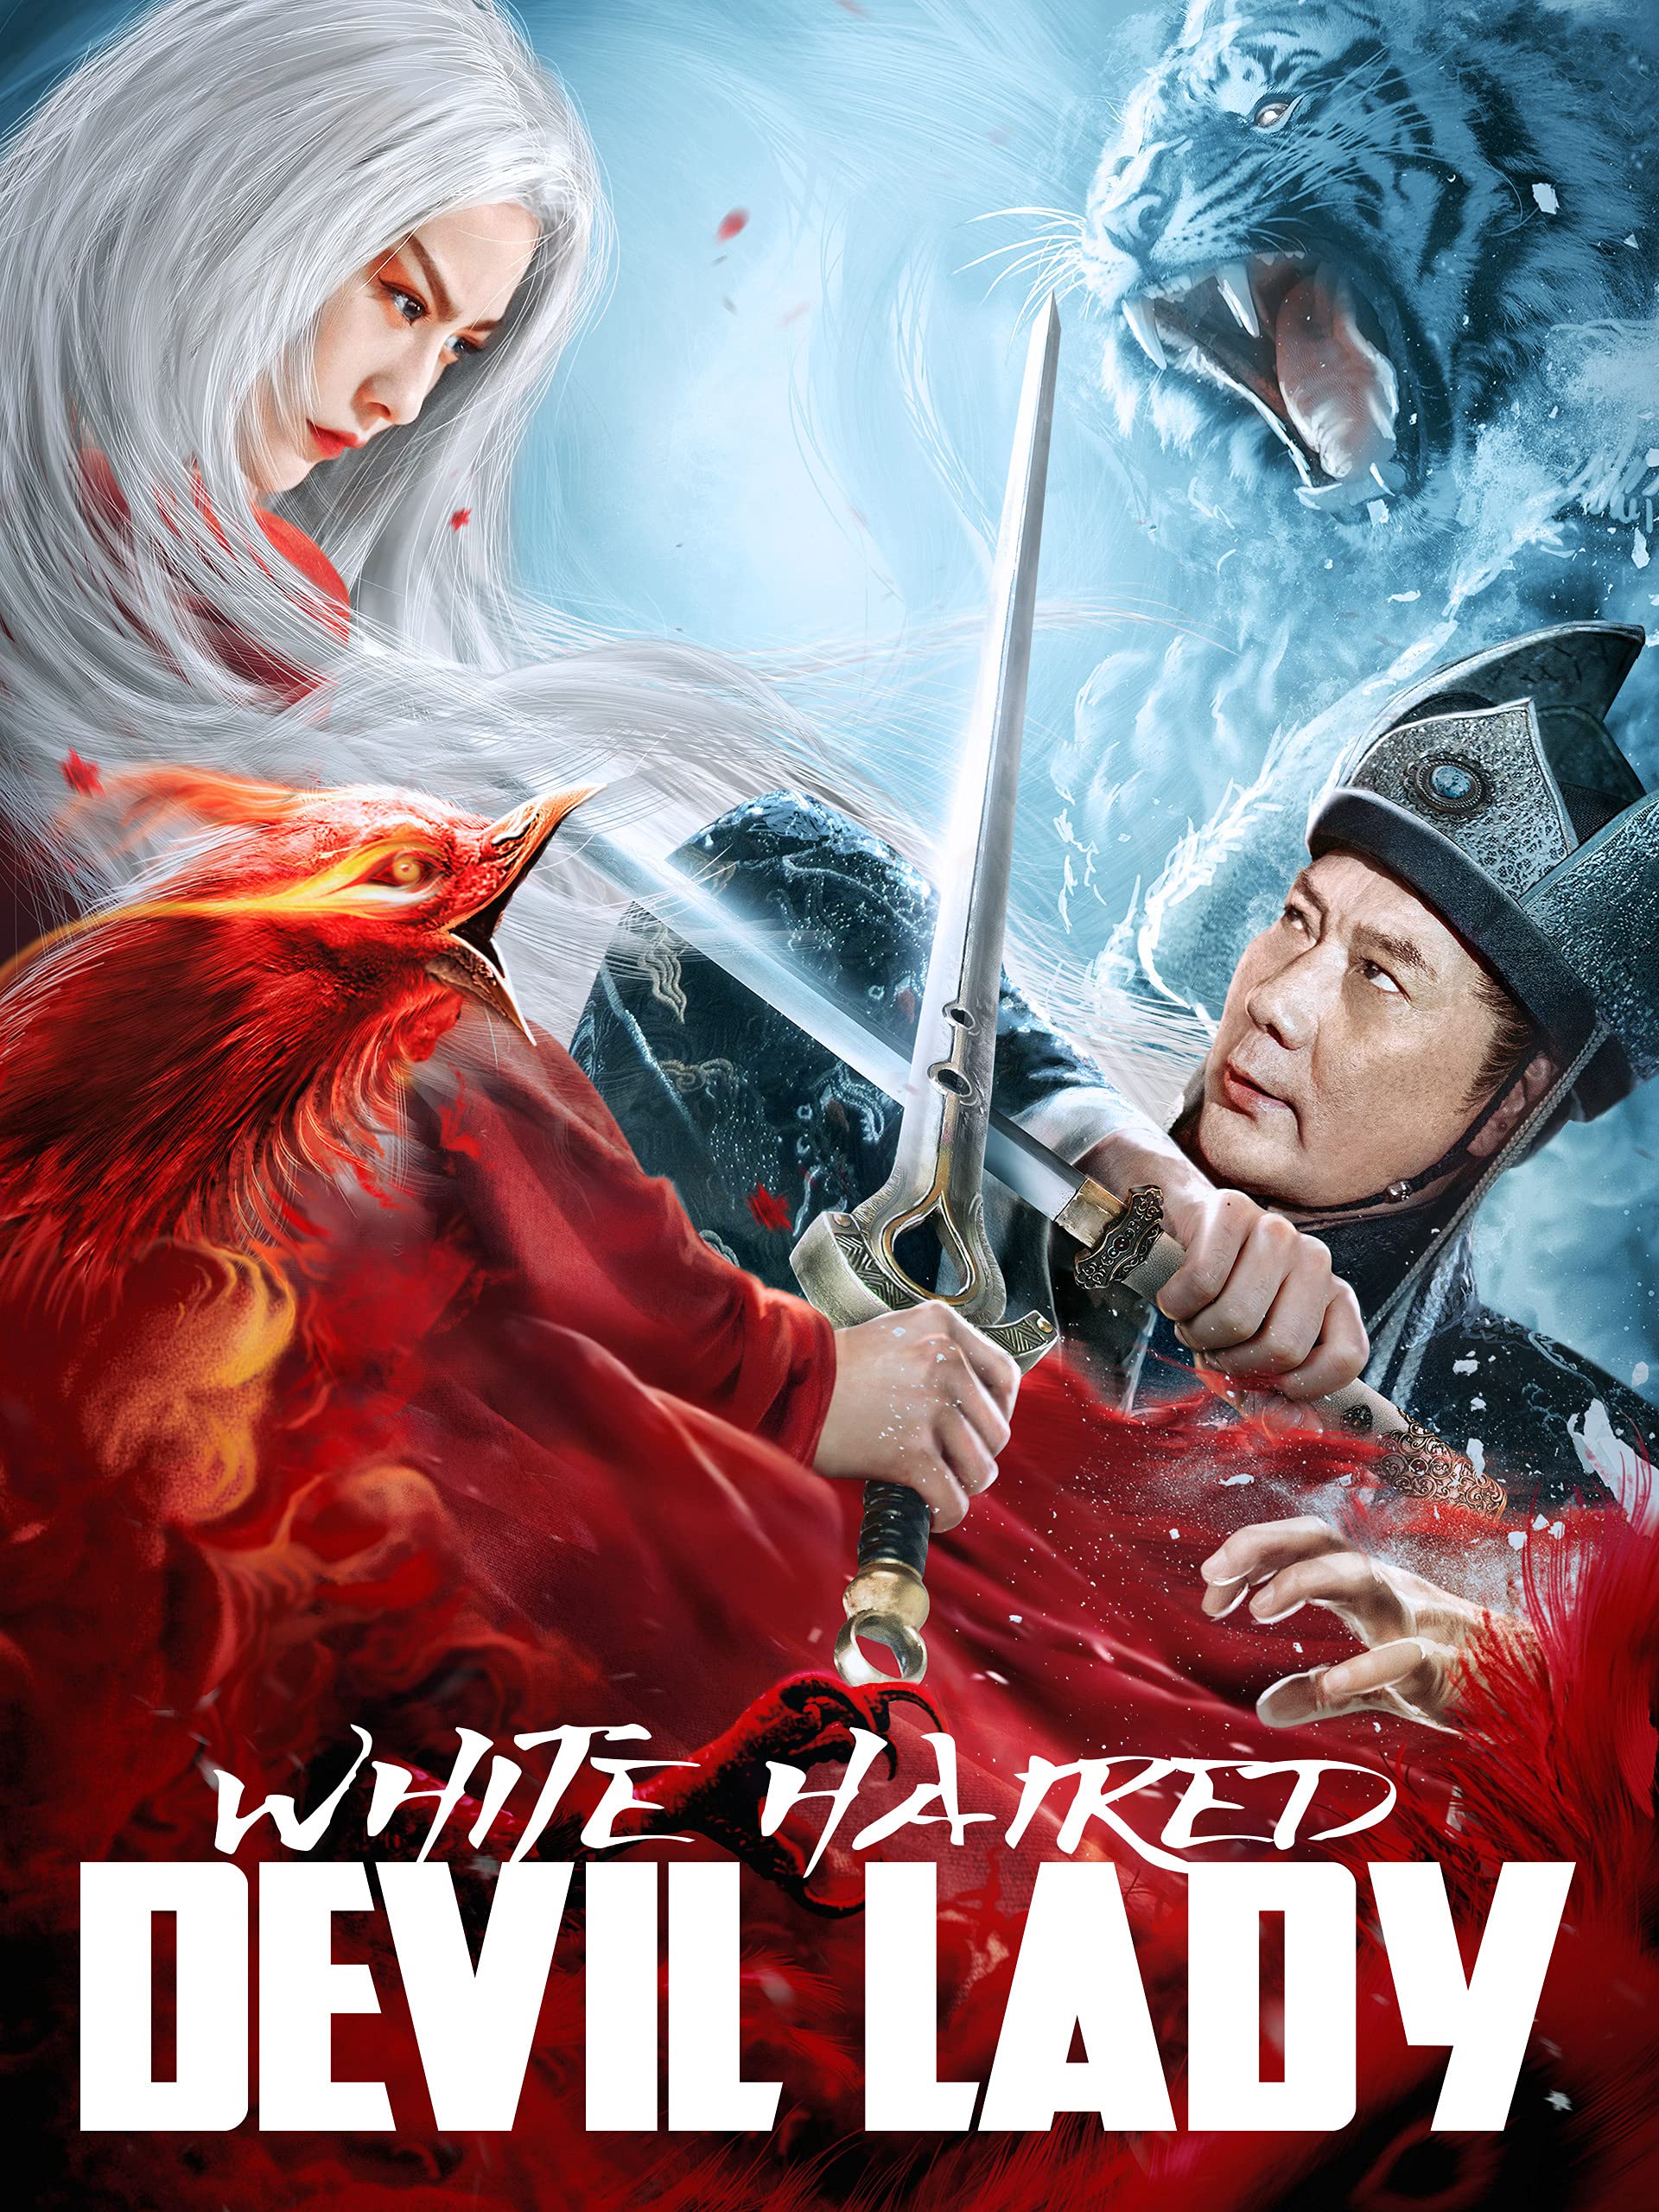 White Haired Devil Lady 2020 Hindi ORG Dual Audio 720p HDRip 950 MB | 260MB Download